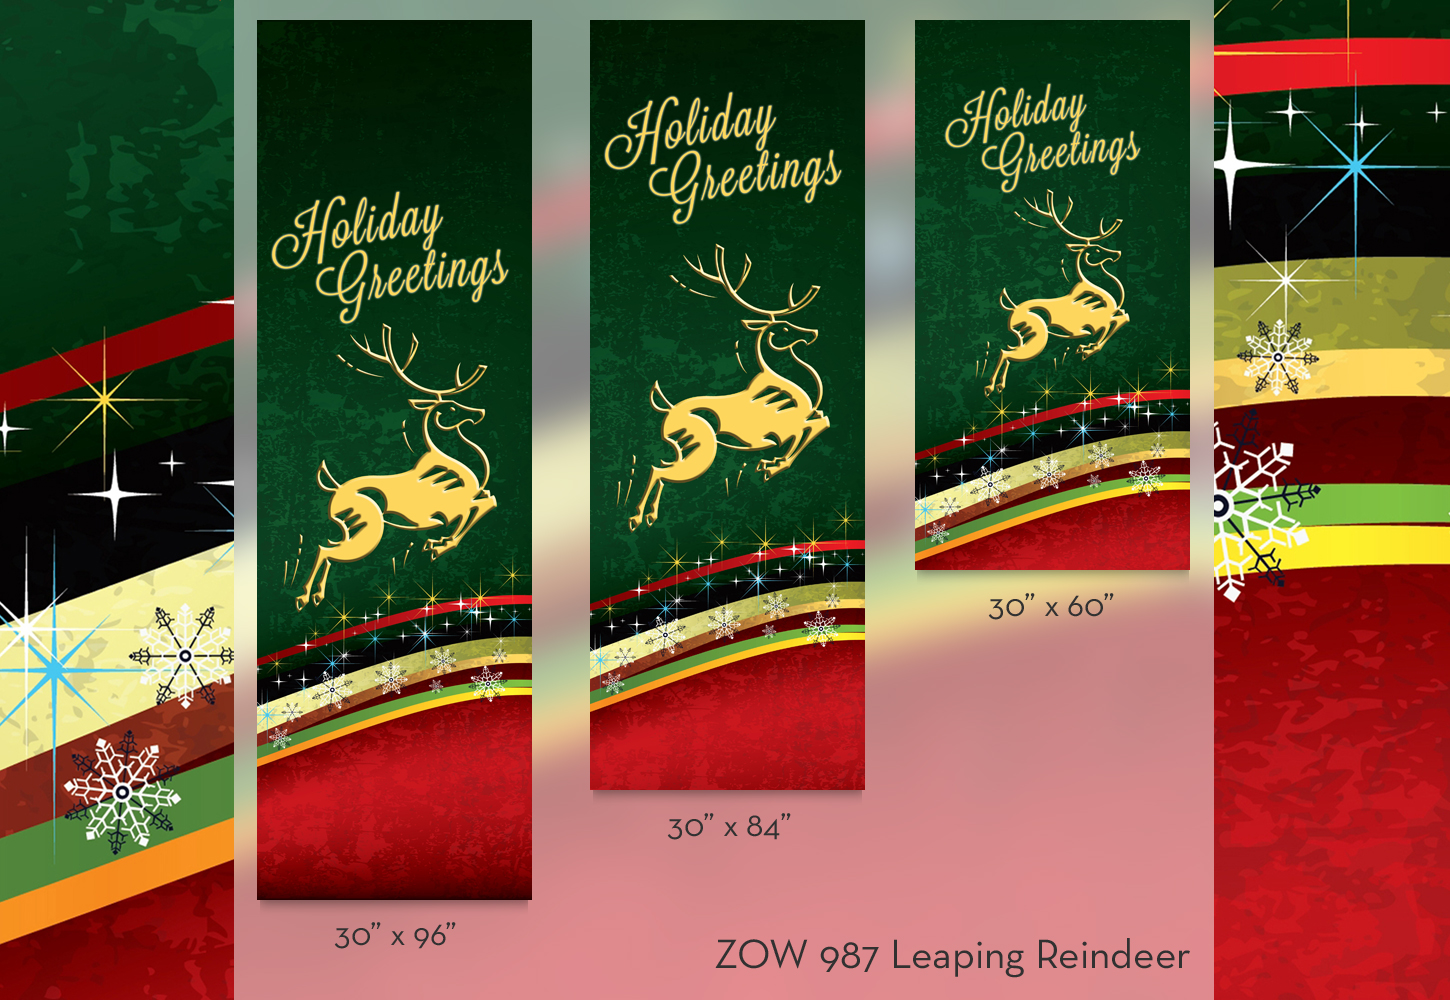 ZOW 987 Leaping Reindeer